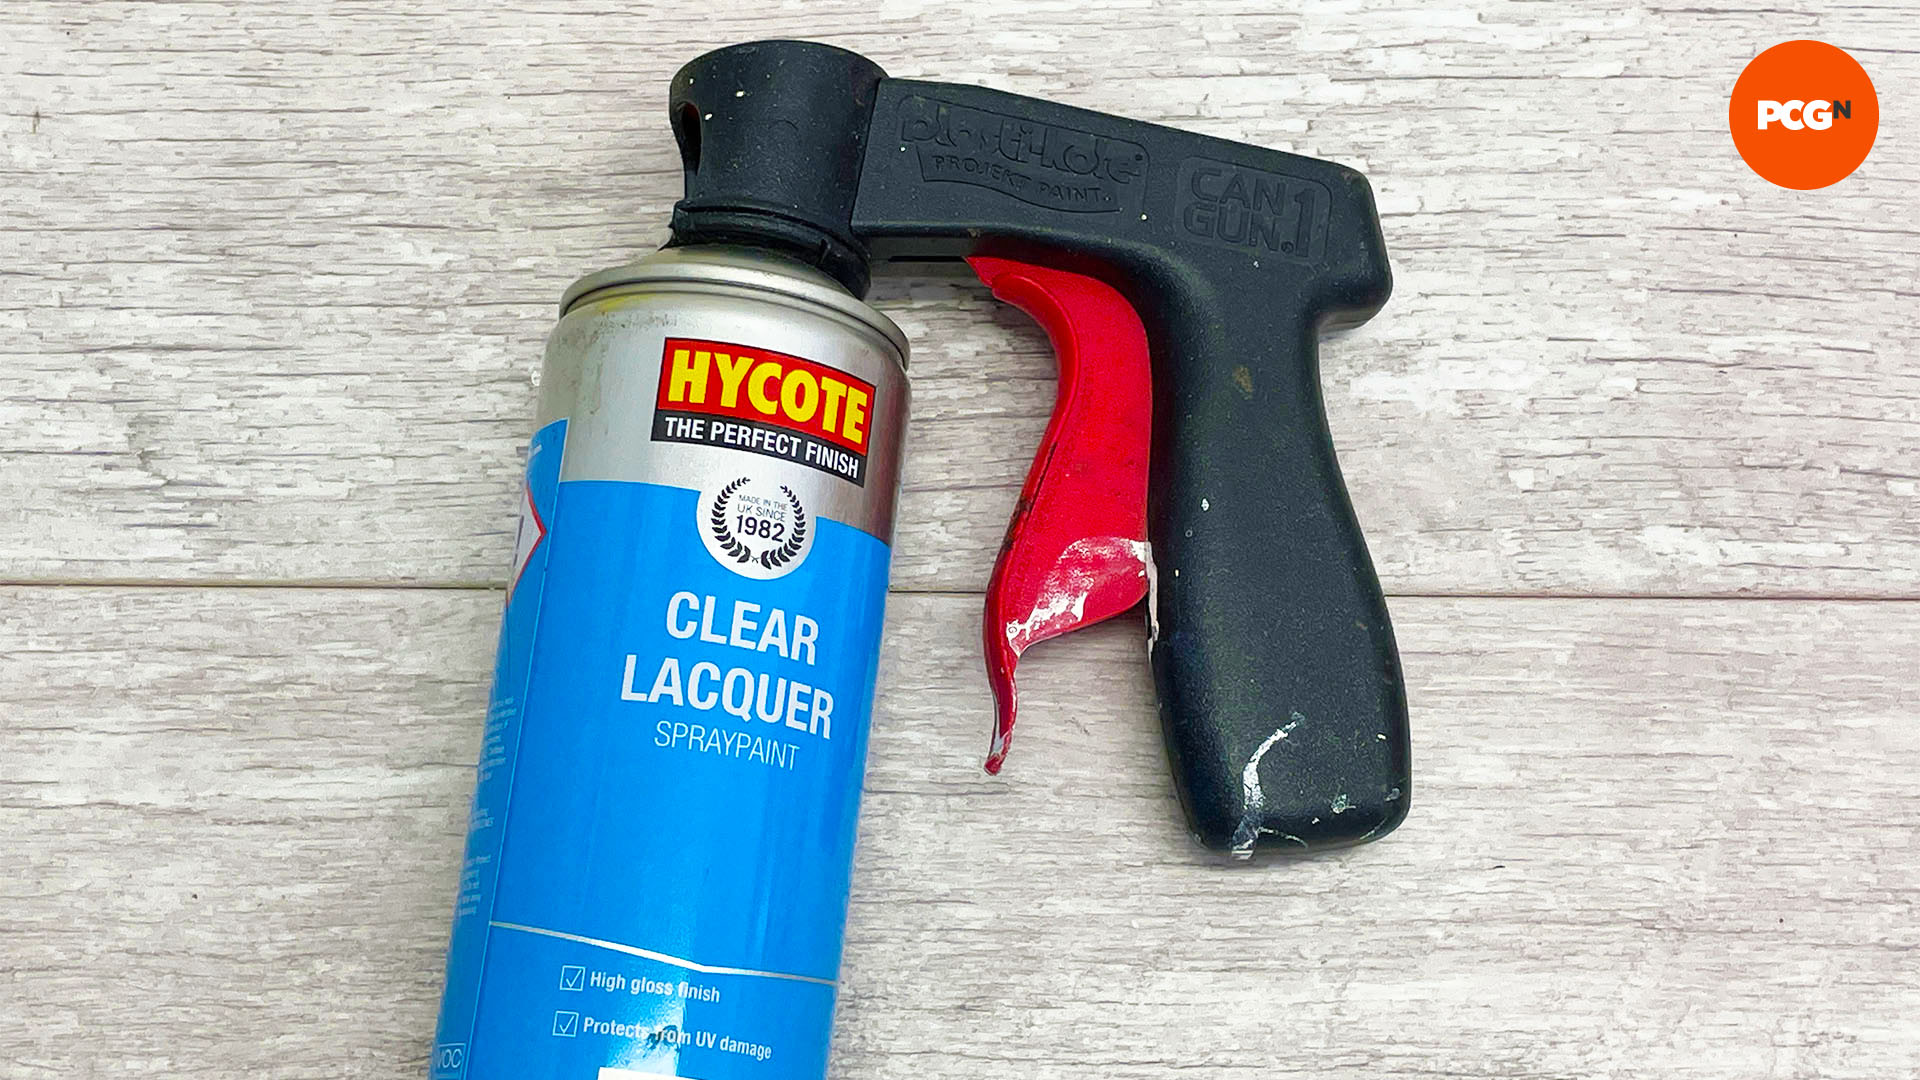 How to paint your PC case: Consider a spray trigger